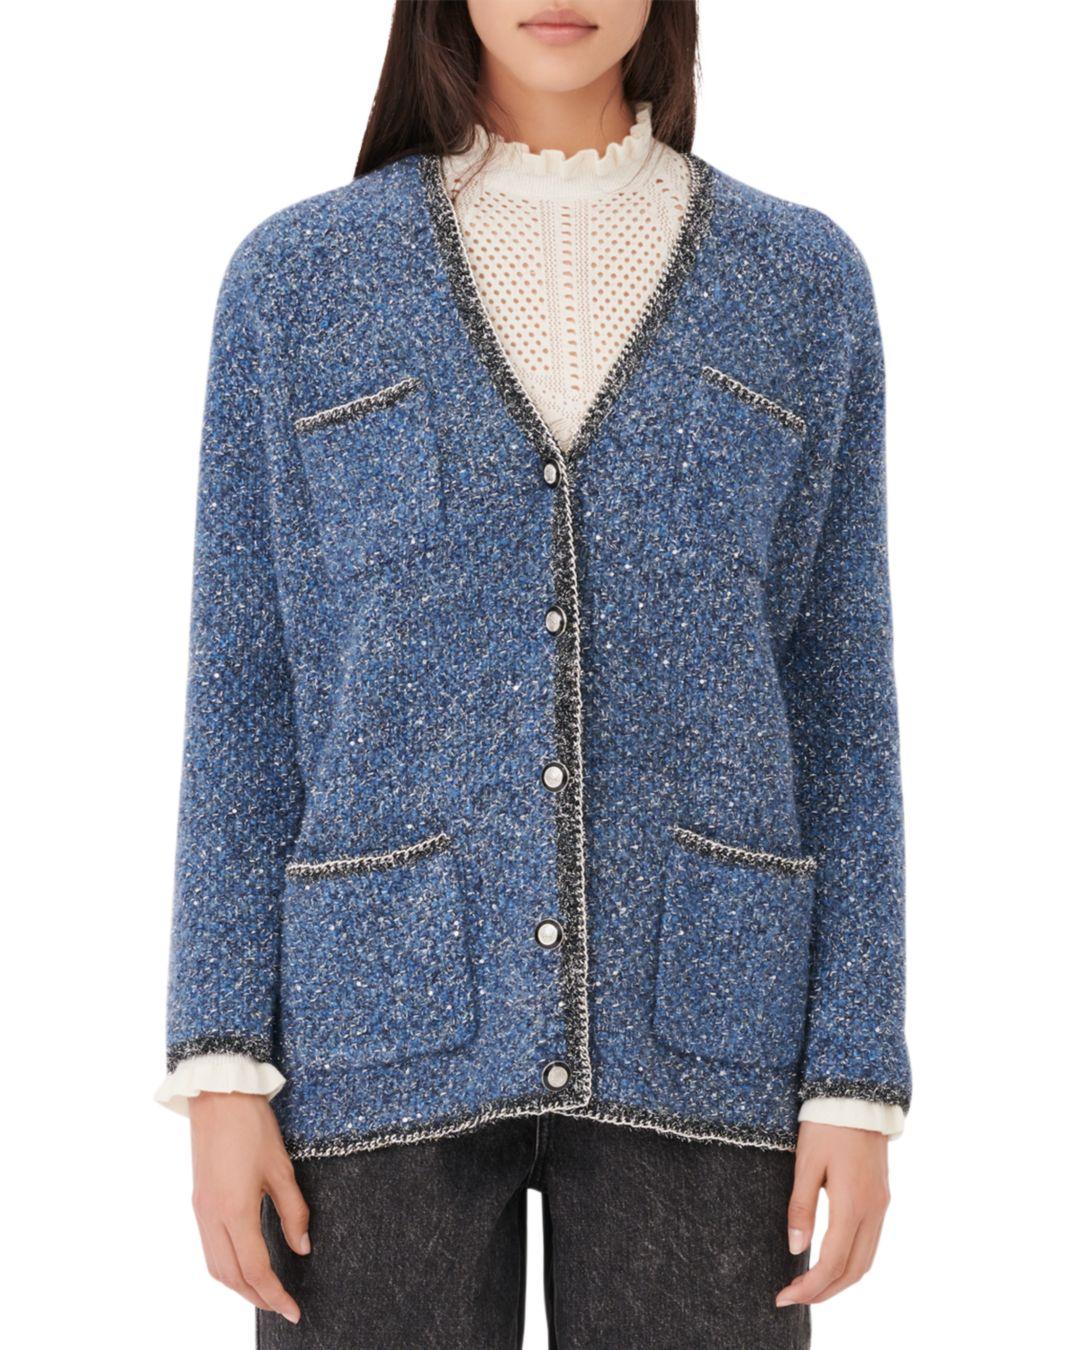 Maje Synthetic Miso Lurex Cardigan With Chain Details in Blue - Lyst